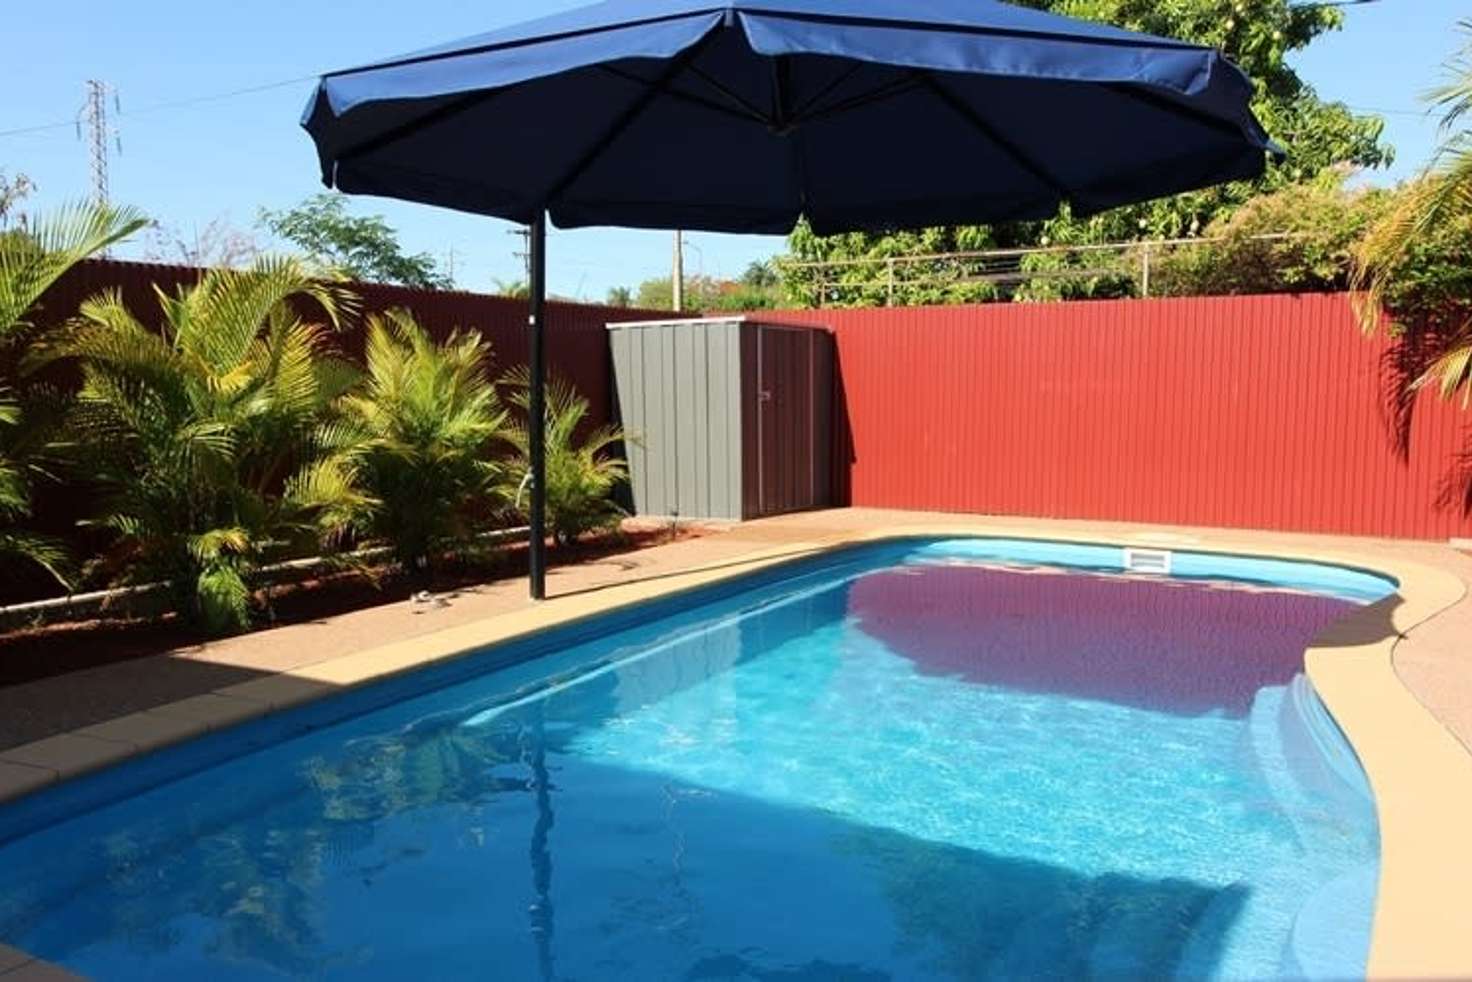 Main view of Homely house listing, 23 Moore Cresent, Mount Isa QLD 4825